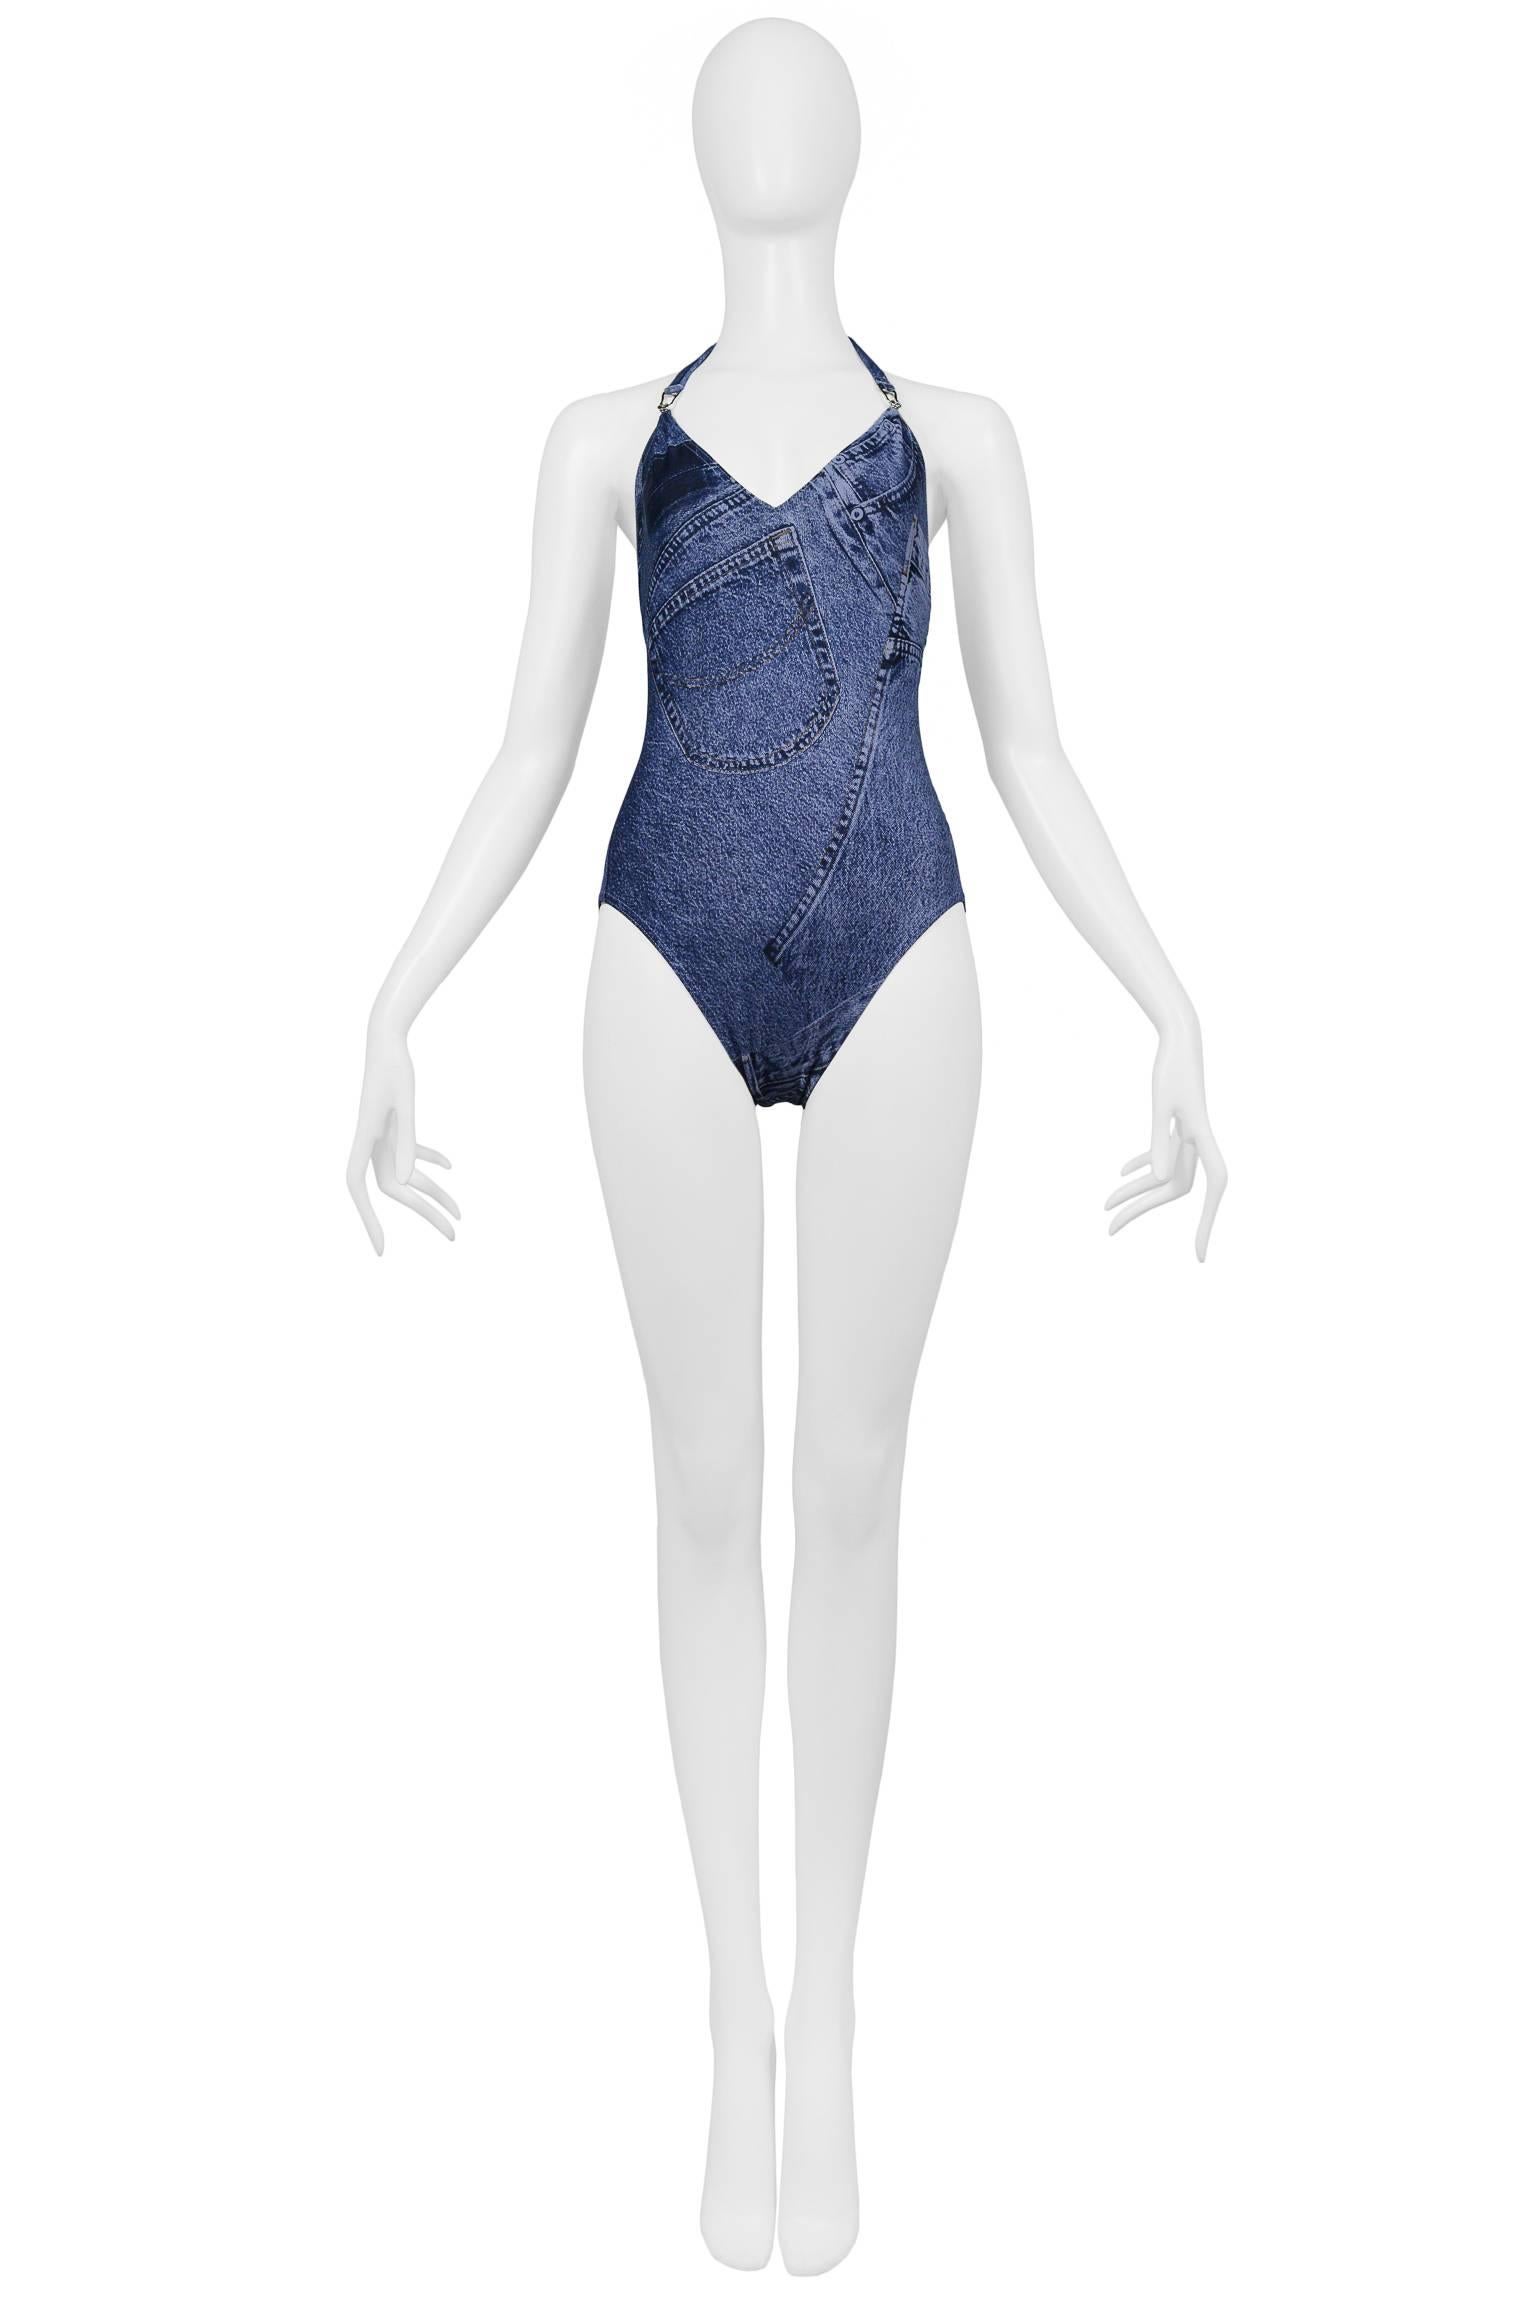 Vintage John Galliano for Christian Dior trompe l'oeil denim one-piece swimsuit. Bathing suit features silver tone hardware. Halter front, low scoop back, and full coverage bottom. Featured in numerous advertisements. Never worn. Collection circa